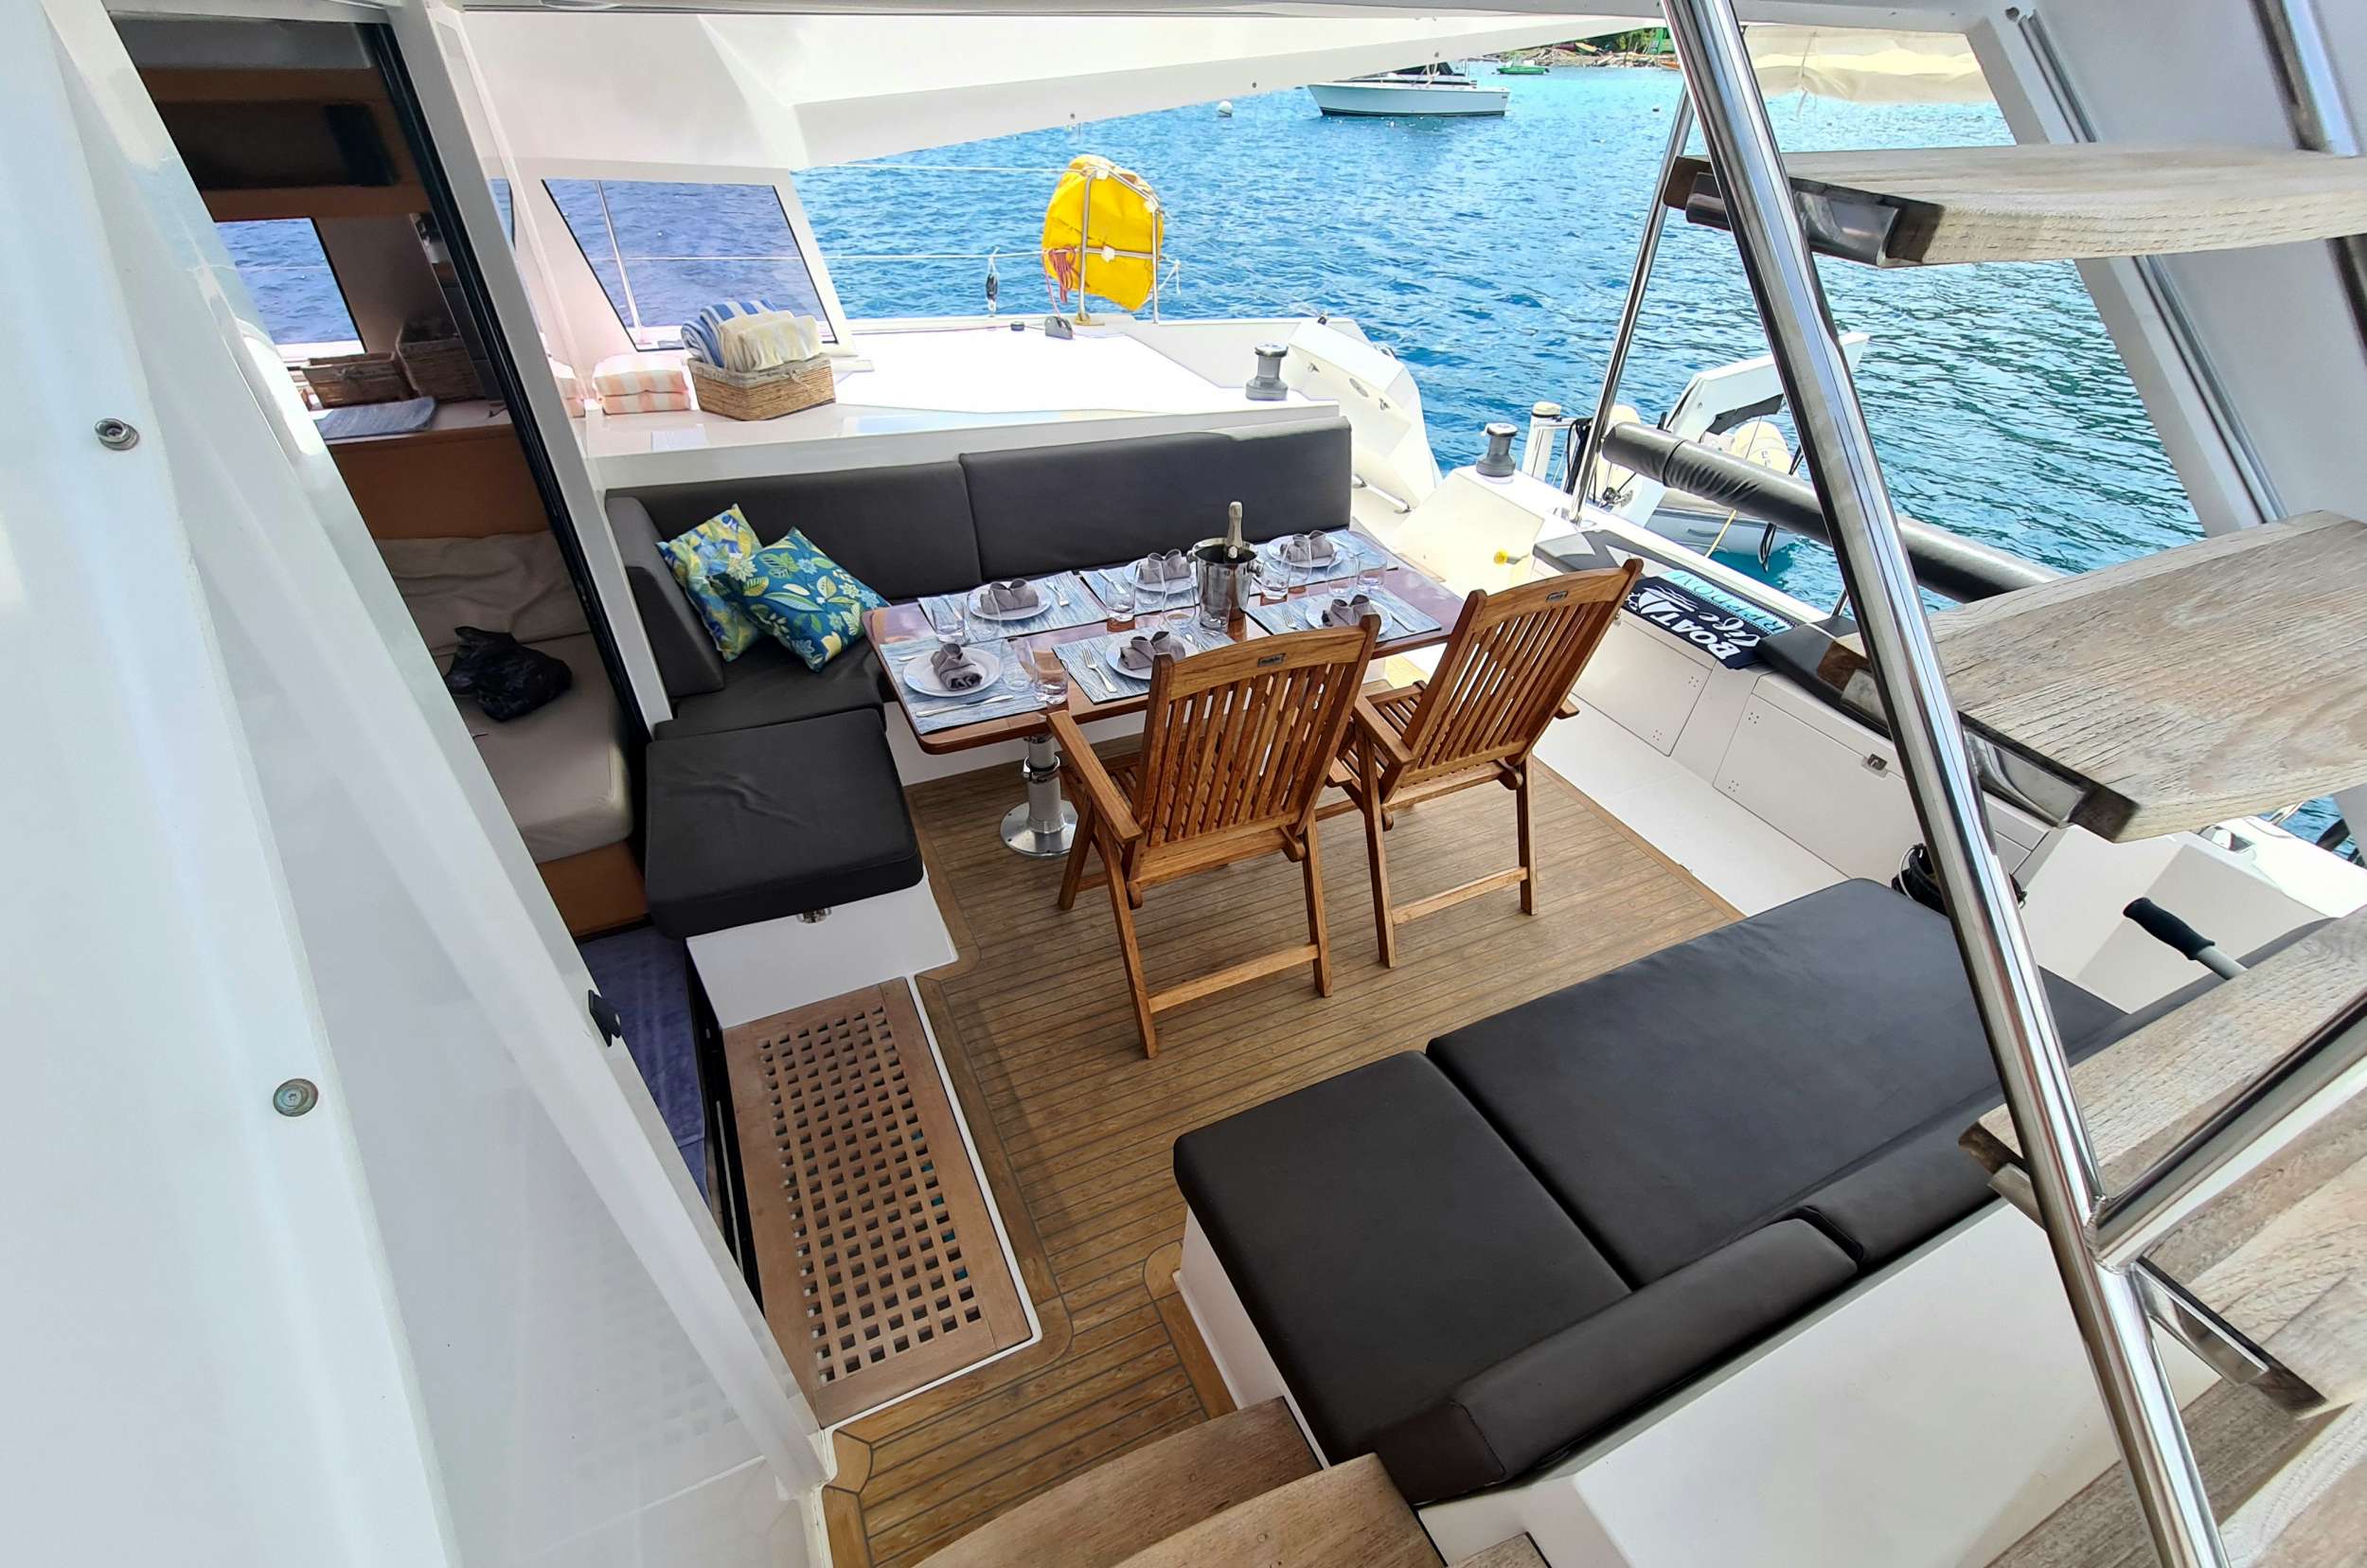 Freedom - Luxury yacht charter St Martin & Boat hire in Caribbean 2